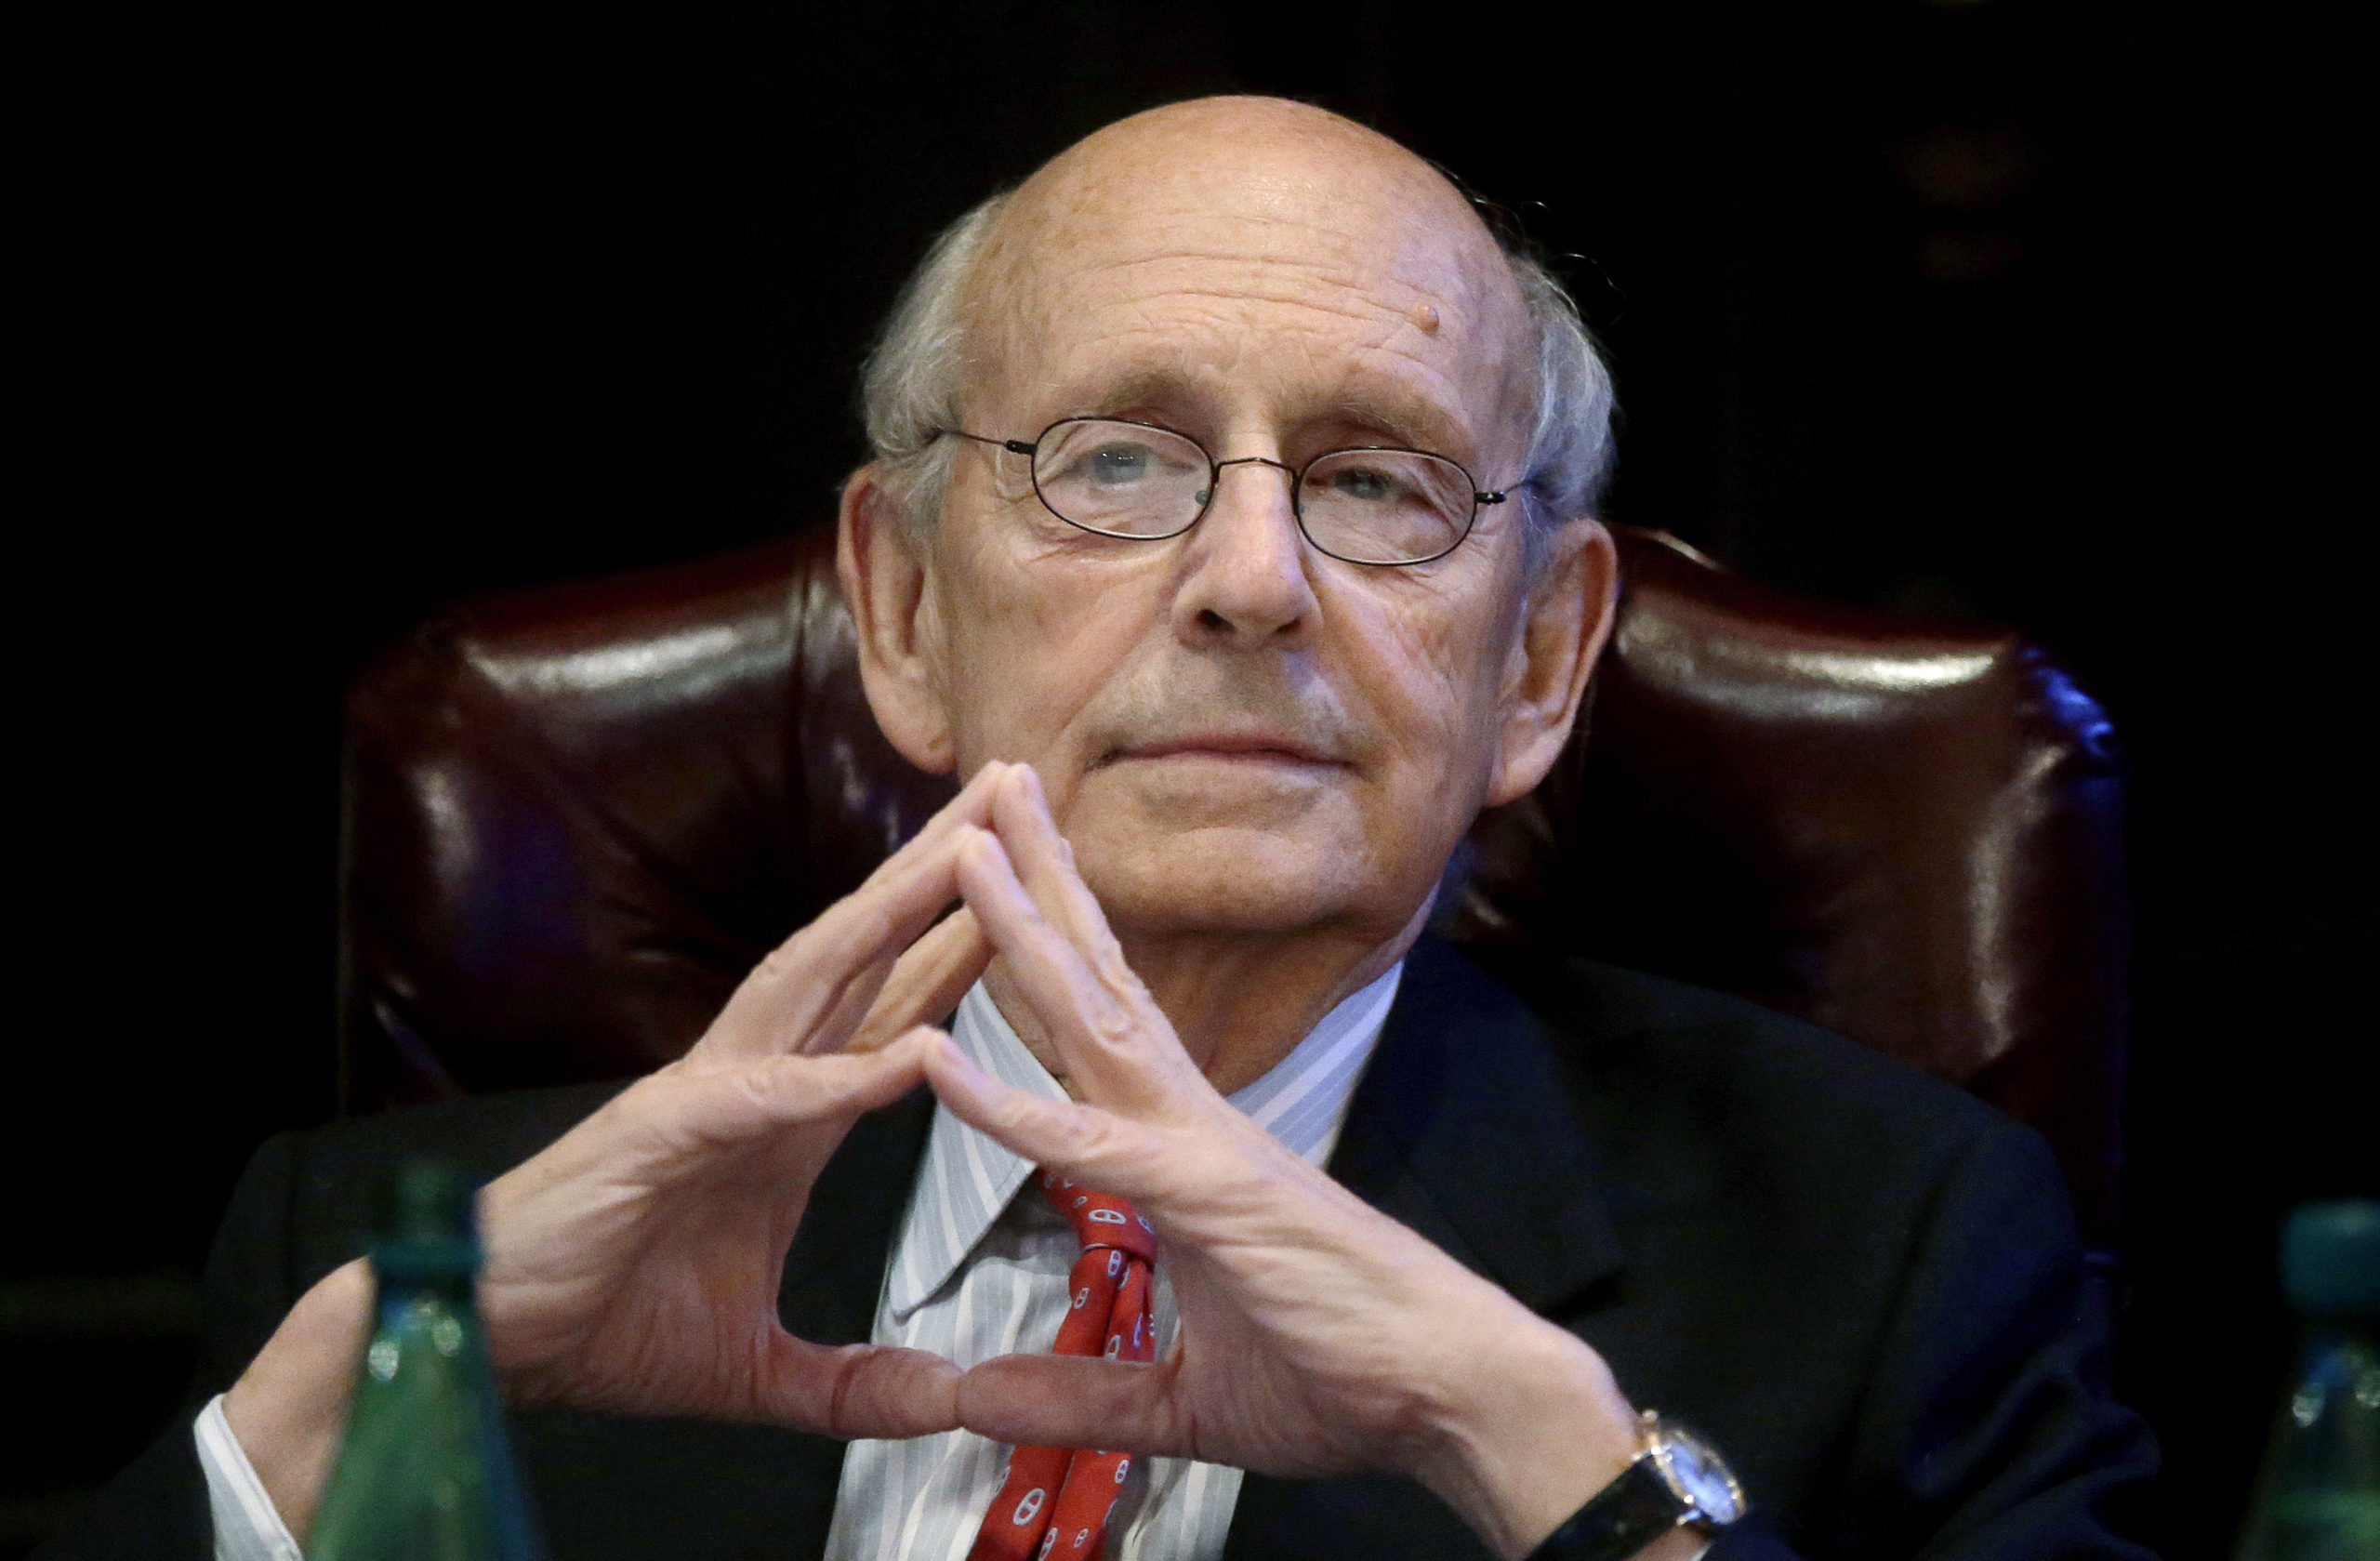 Supreme Court Associate Justice Stephen Breyer listens during a forum at the French Cultural Center in Boston, Massachusetts, on Feb. 13, 2017.